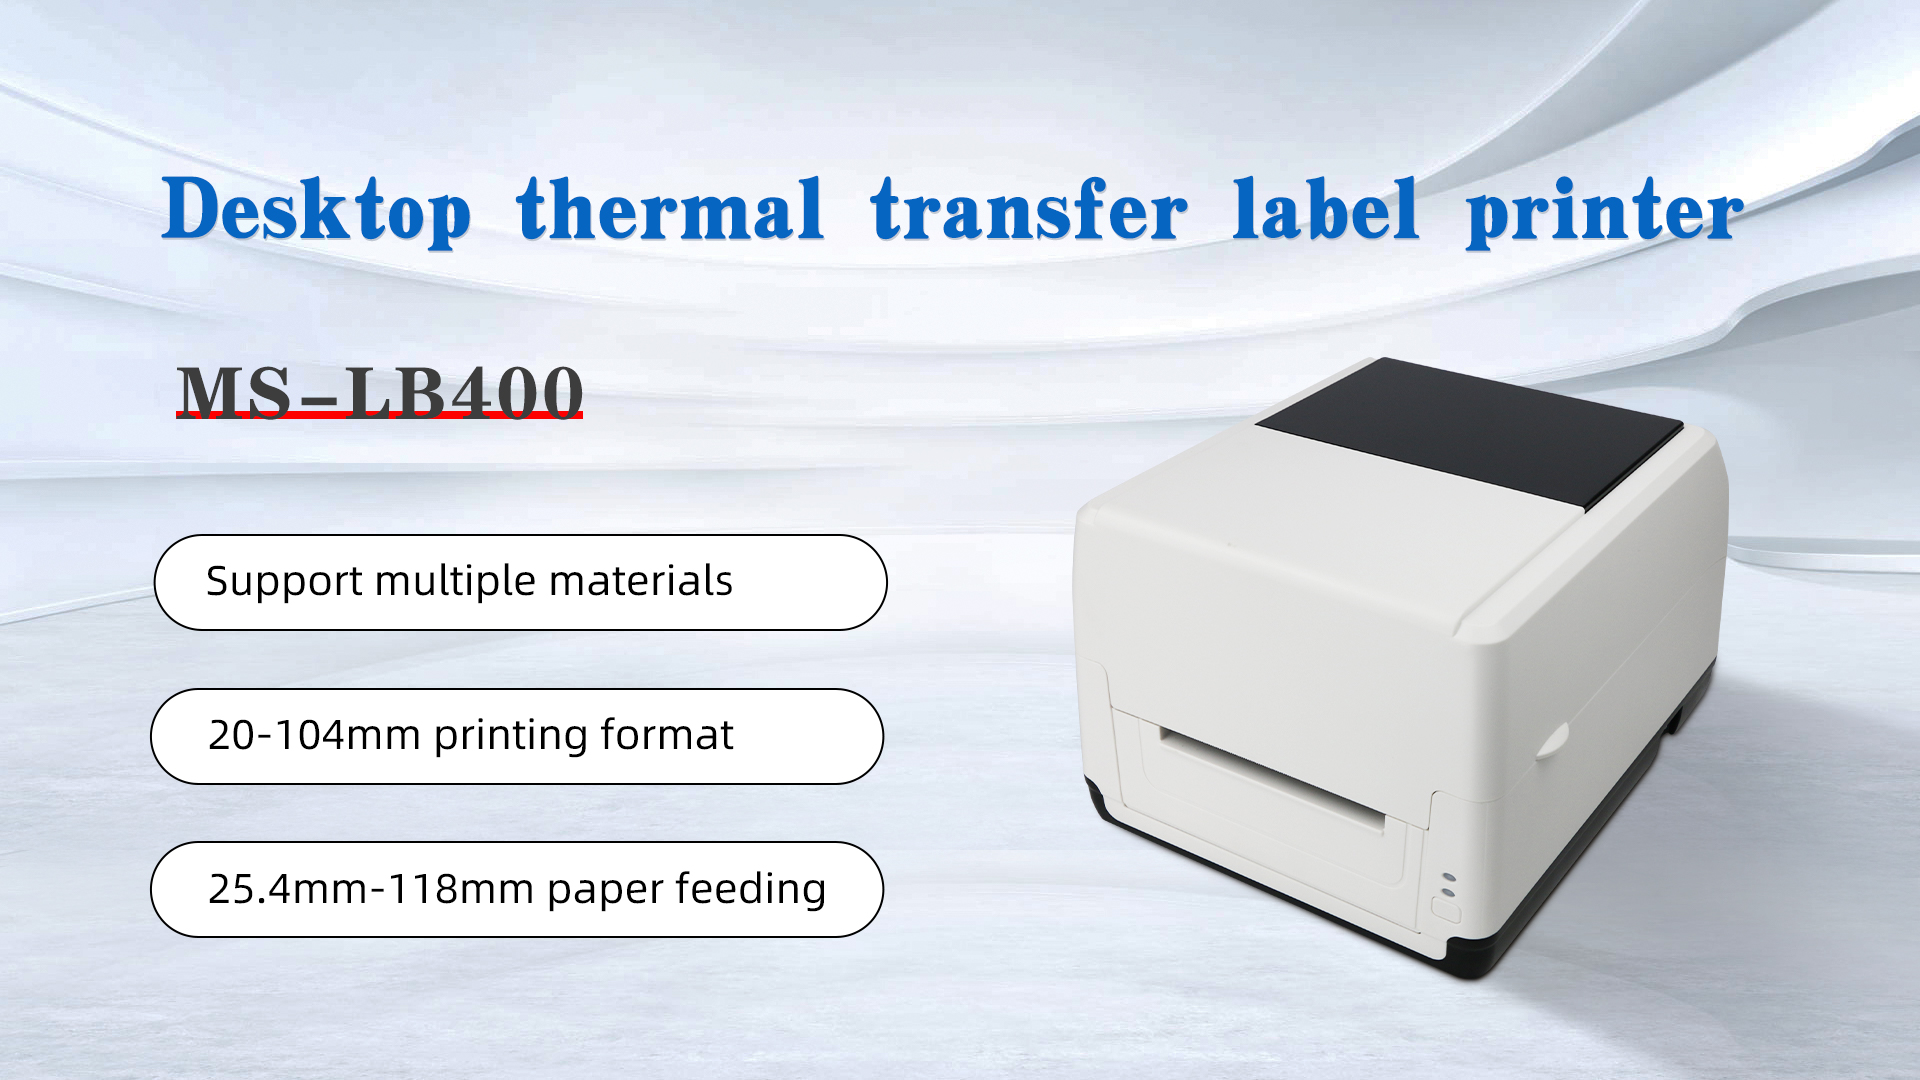 MASUNG 118mm thermal transfer label printer MS-LB400 is used in express transportation field